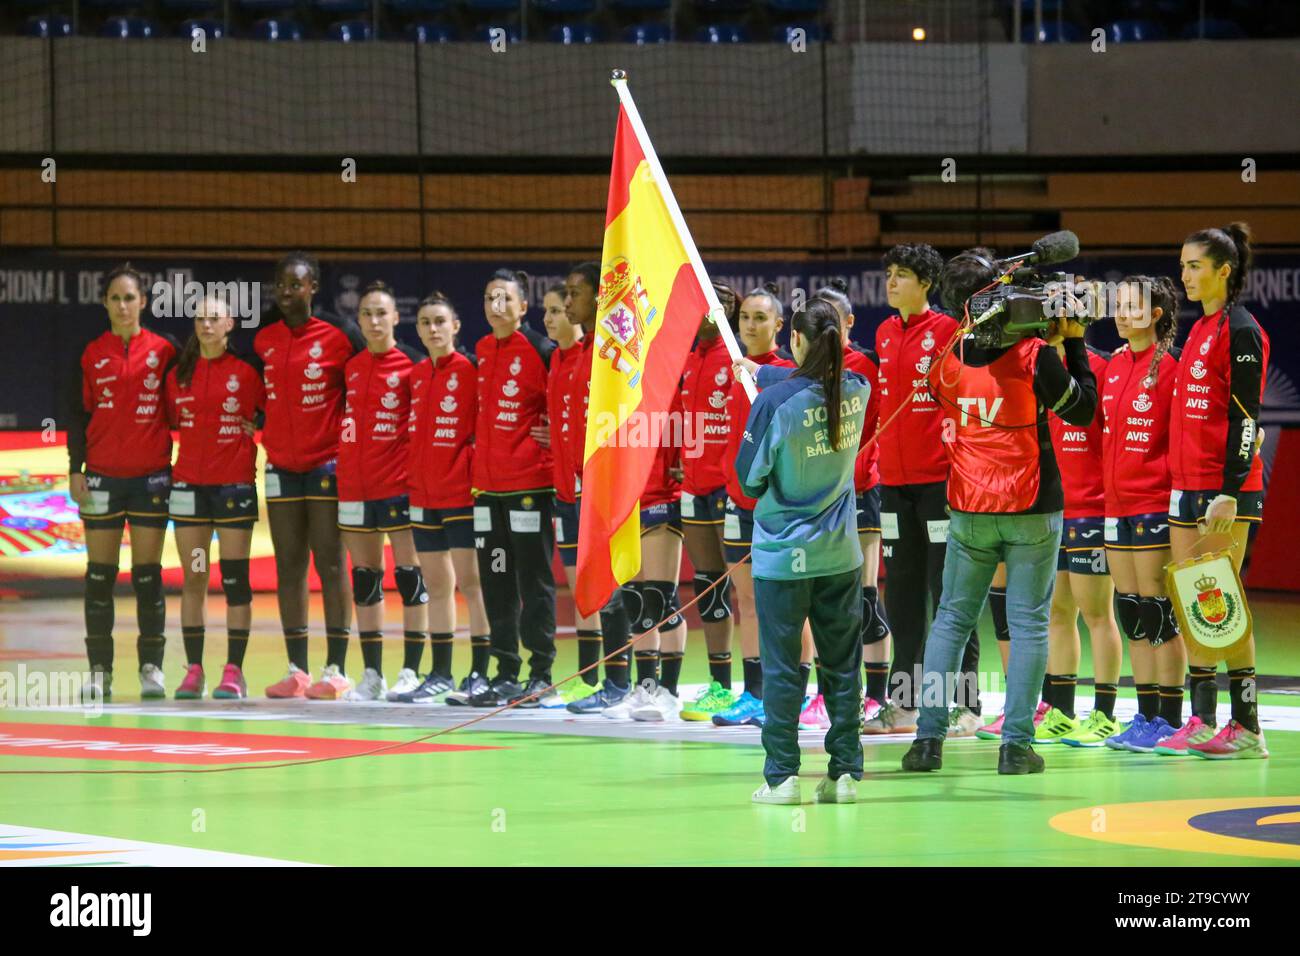 Santander, Spain, 24th November, 2023: The Spanish team listening to the national anthem during the 1st Matchday of the 2023 Spain Women's International Tournament between Spain and Japan, on November 24, 2023, at the Santander Sports Palace, in Santander, Spain. Credit: Alberto Brevers / Alamy Live News. Stock Photo